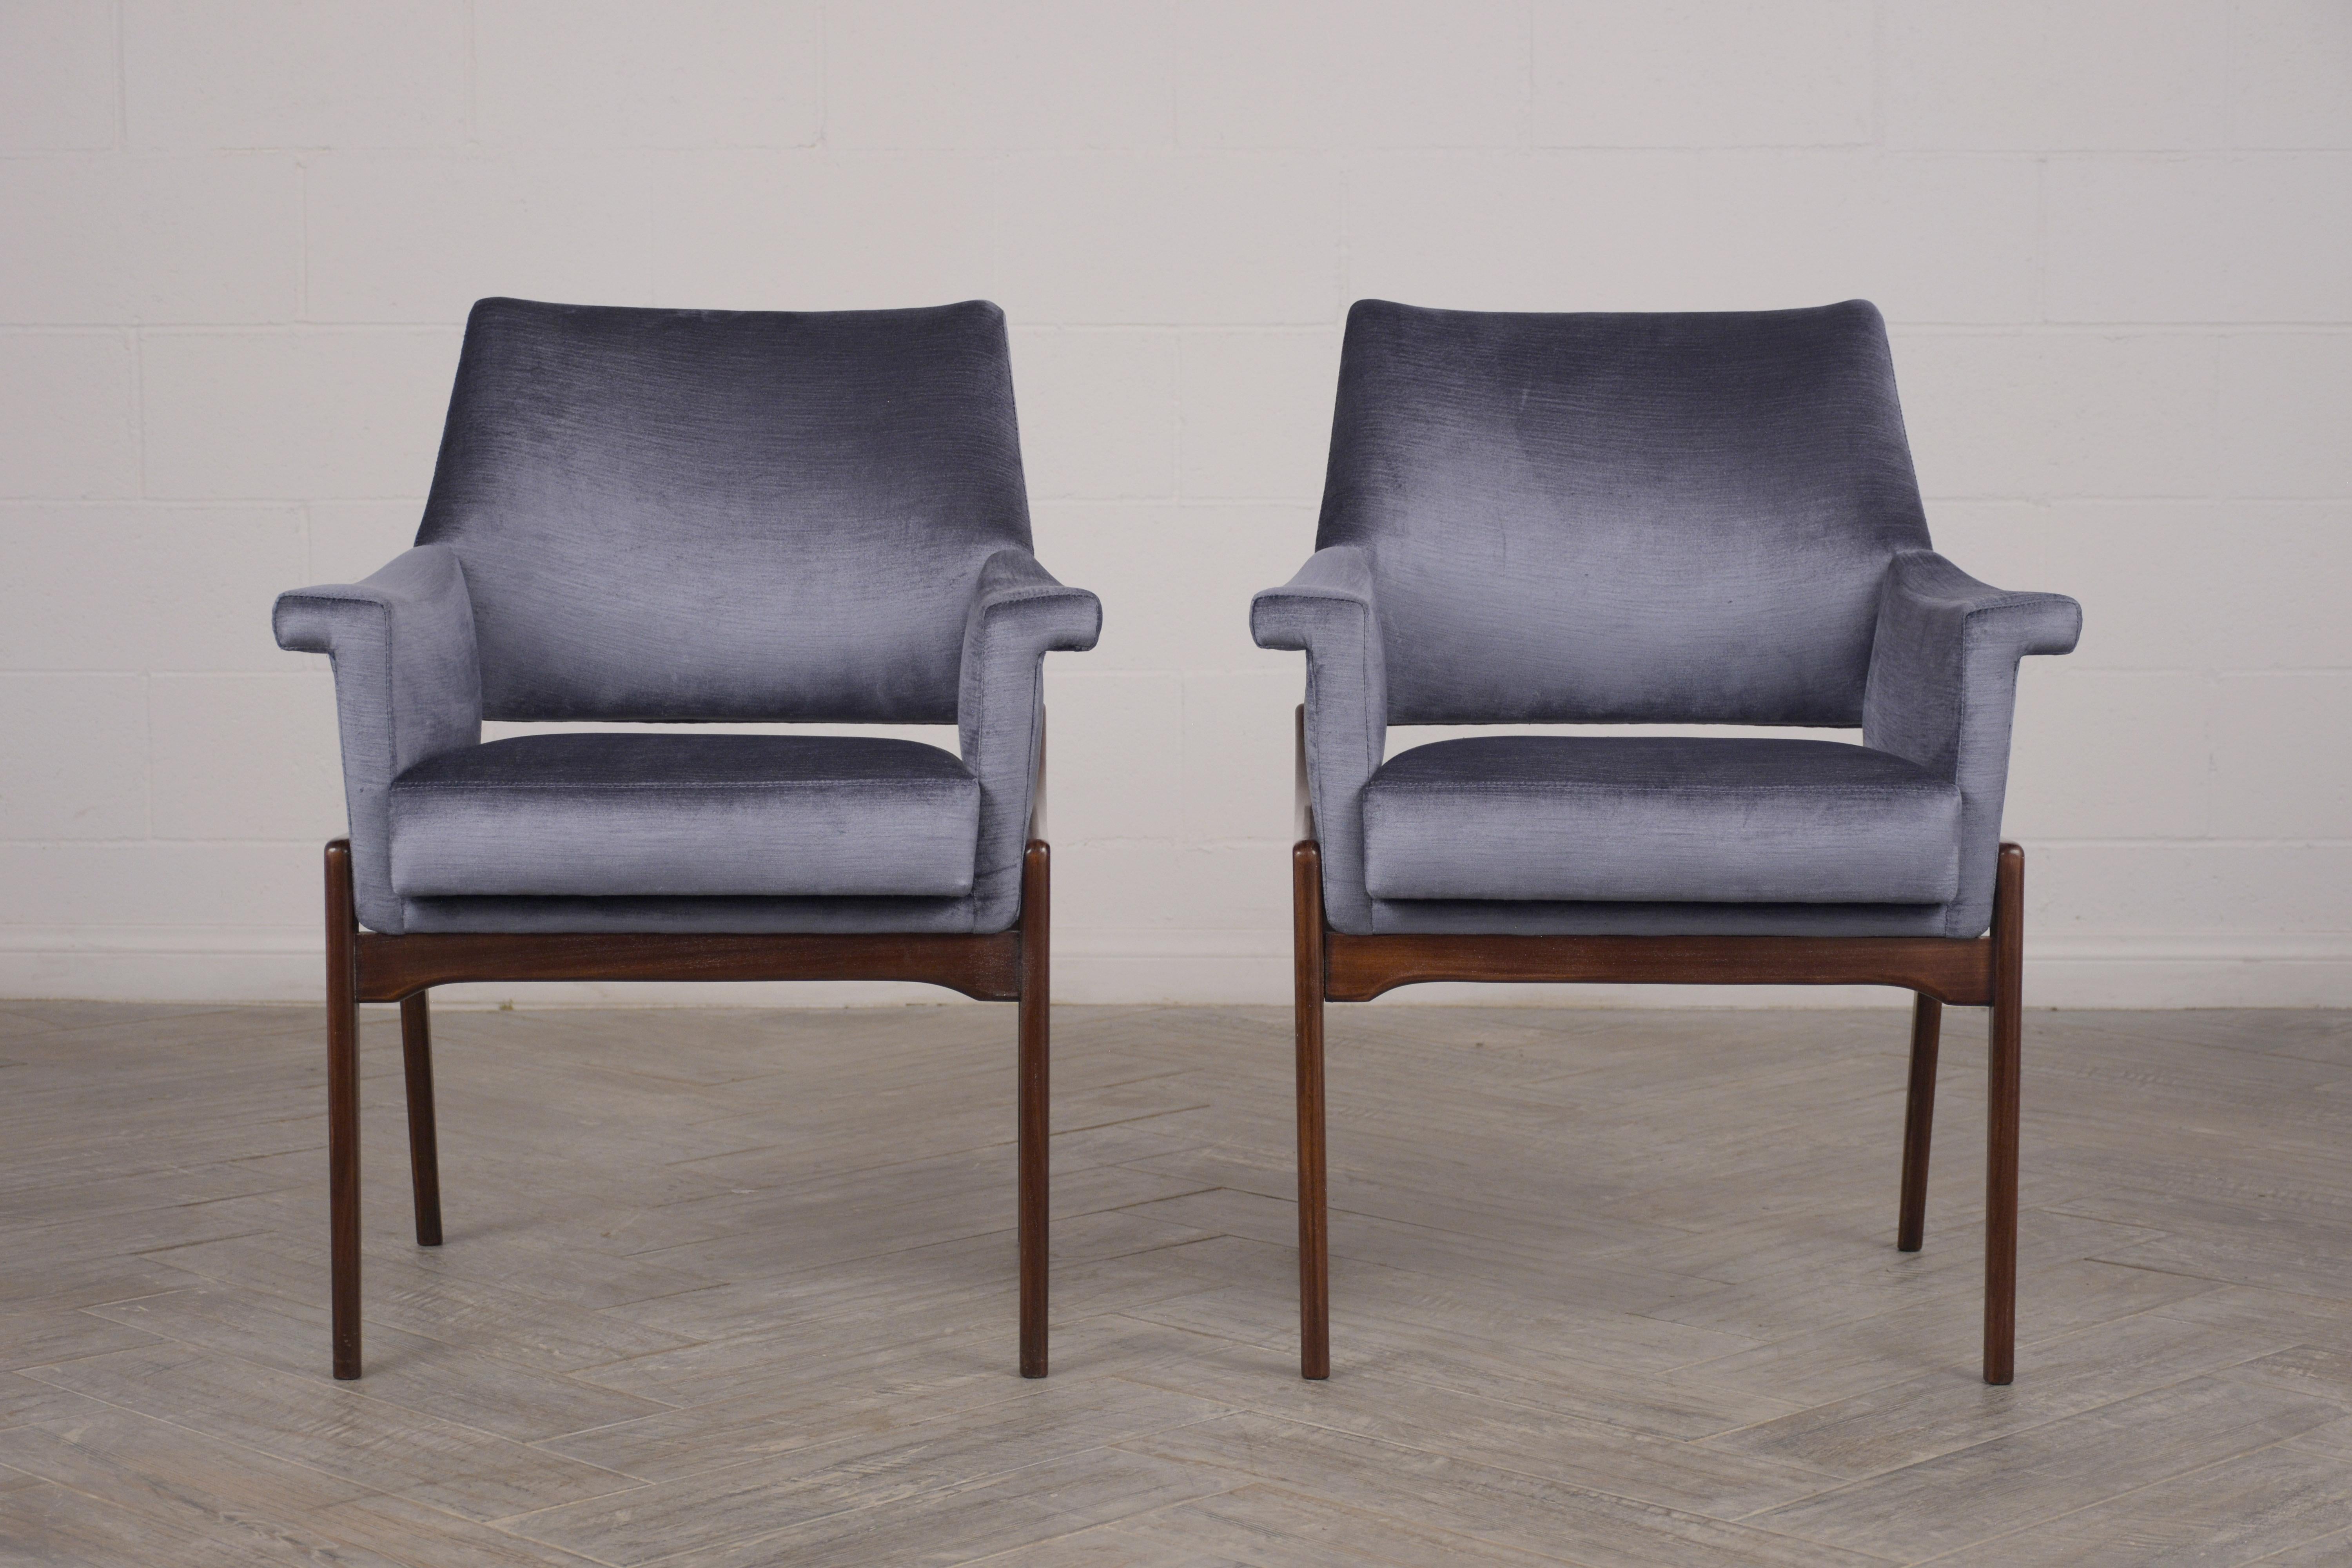 Pair of Modern Rosewood Chairs with Lacquered Finish 15